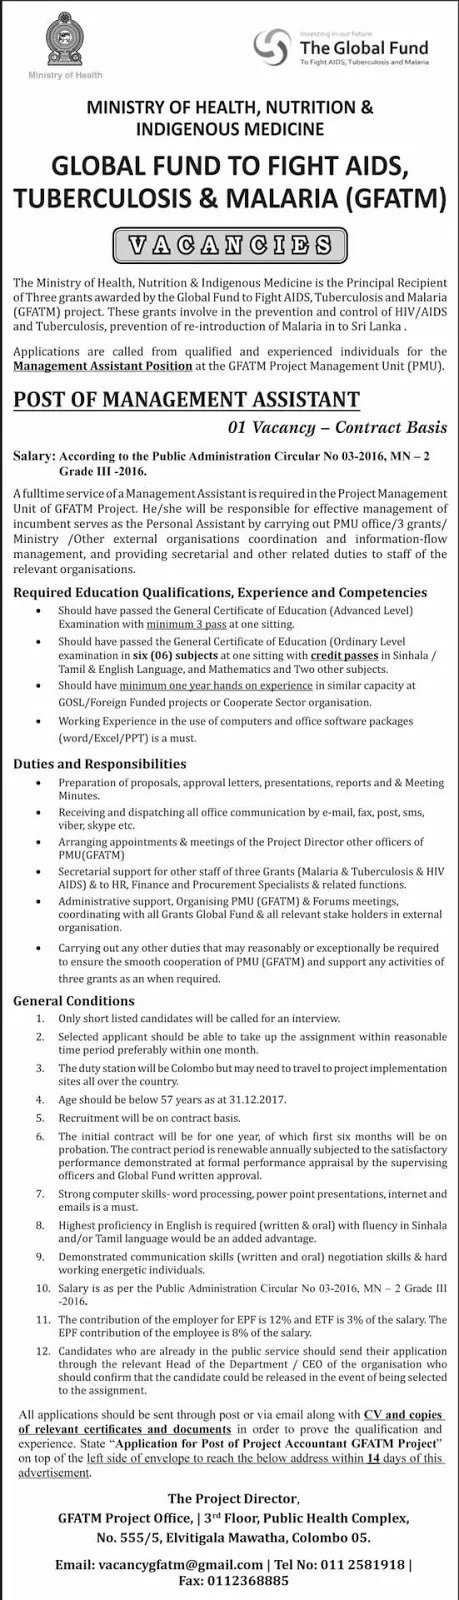 Management Assistant - Ministry of Health Nutrition & Indigenous Medicine